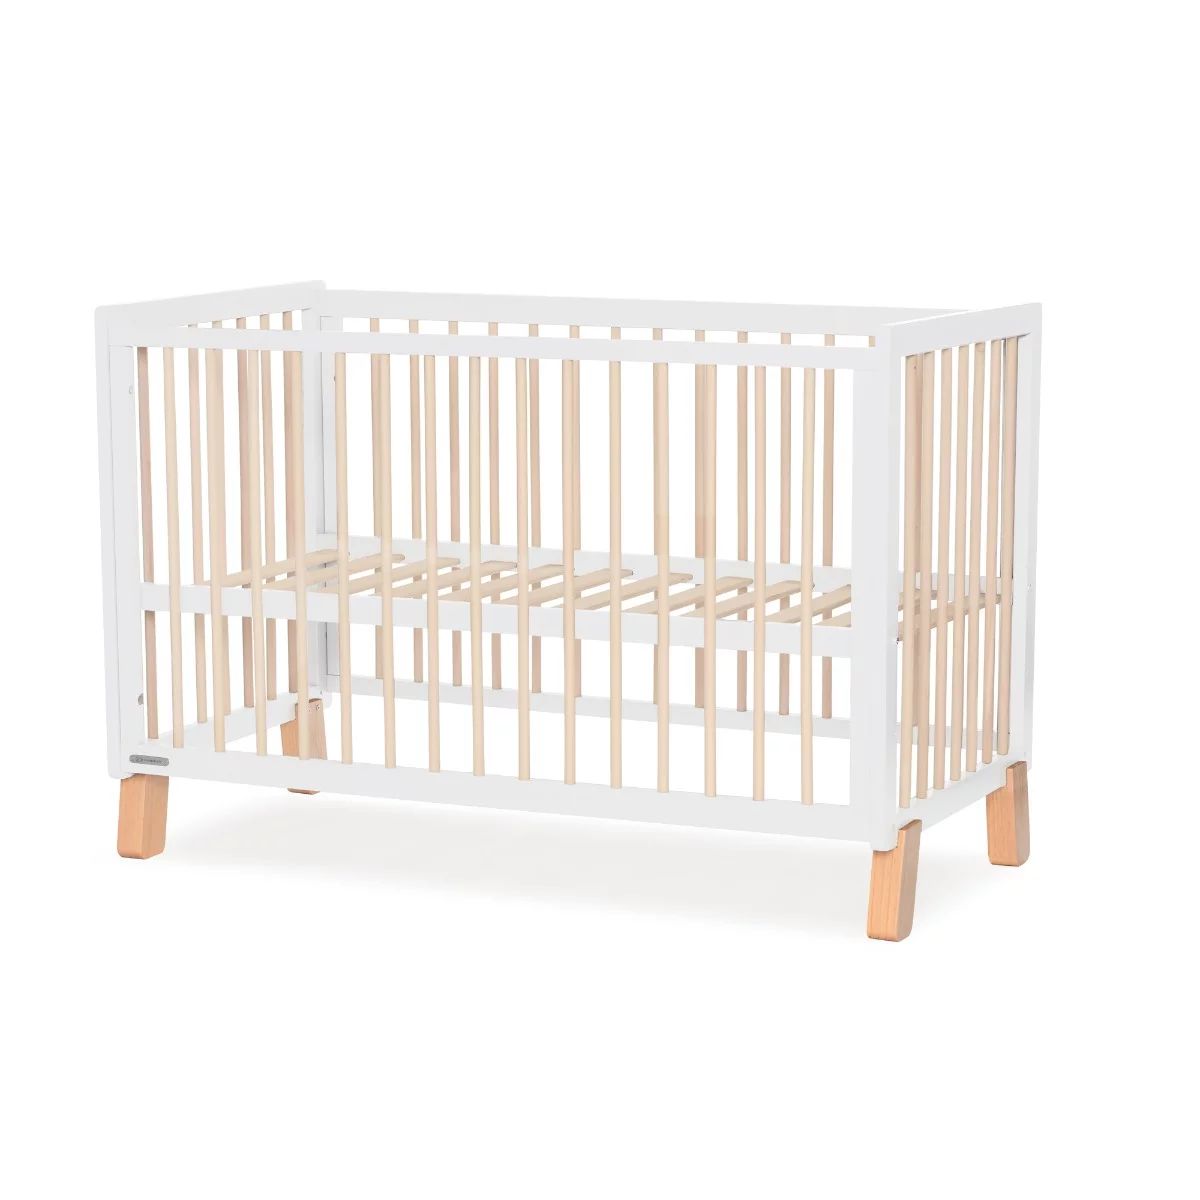 Wooden bed LUNKY white